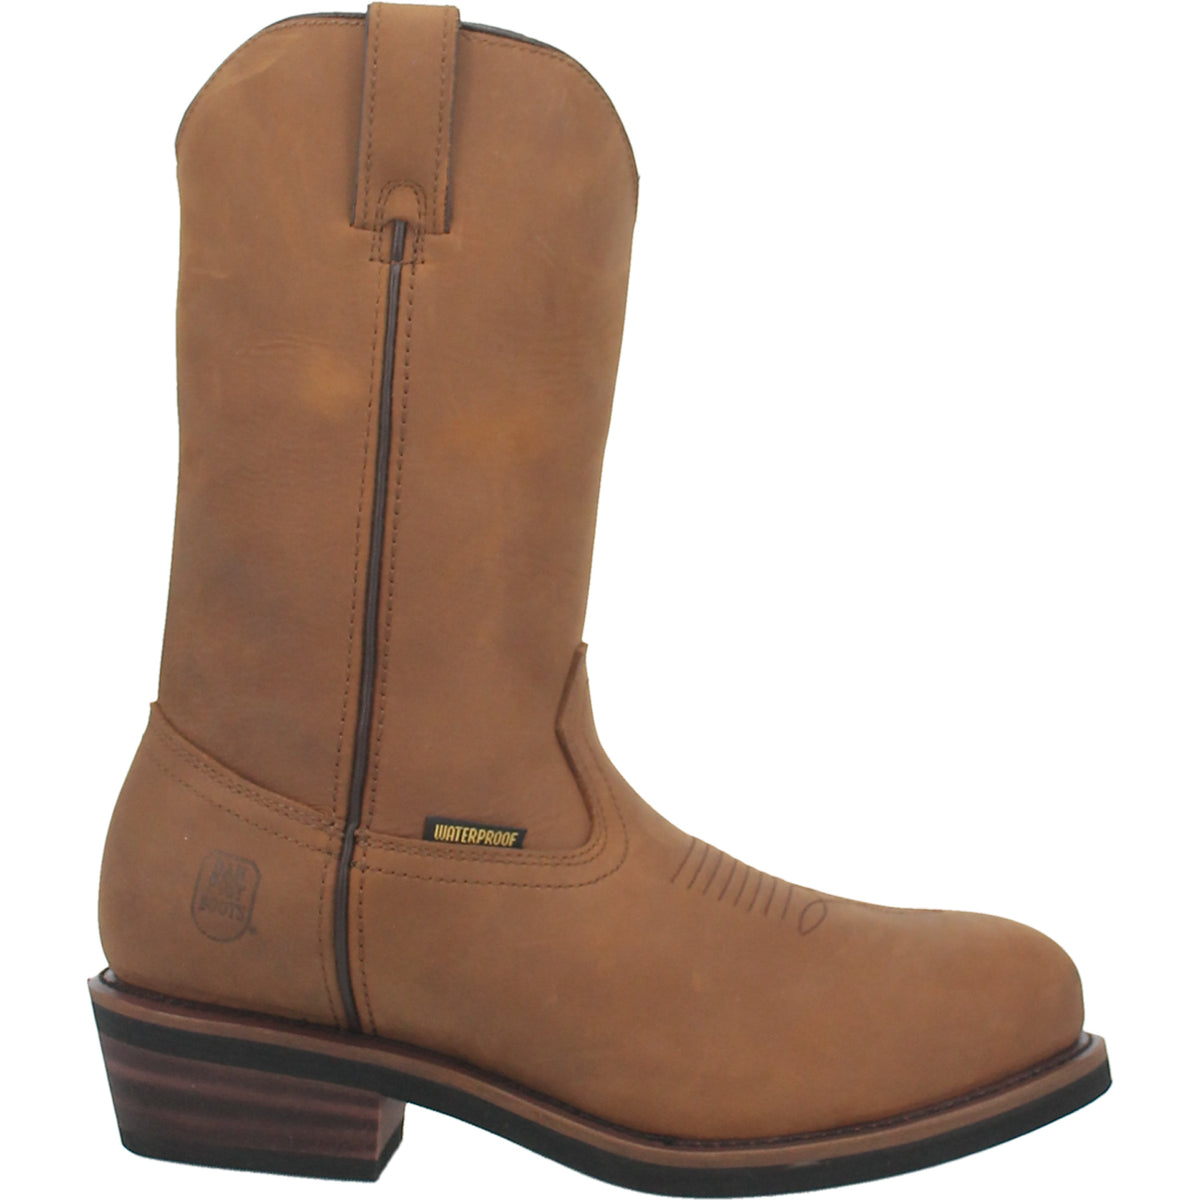 ALBUQUERQUE WATERPROOF STEEL TOE LEATHER BOOT Cover